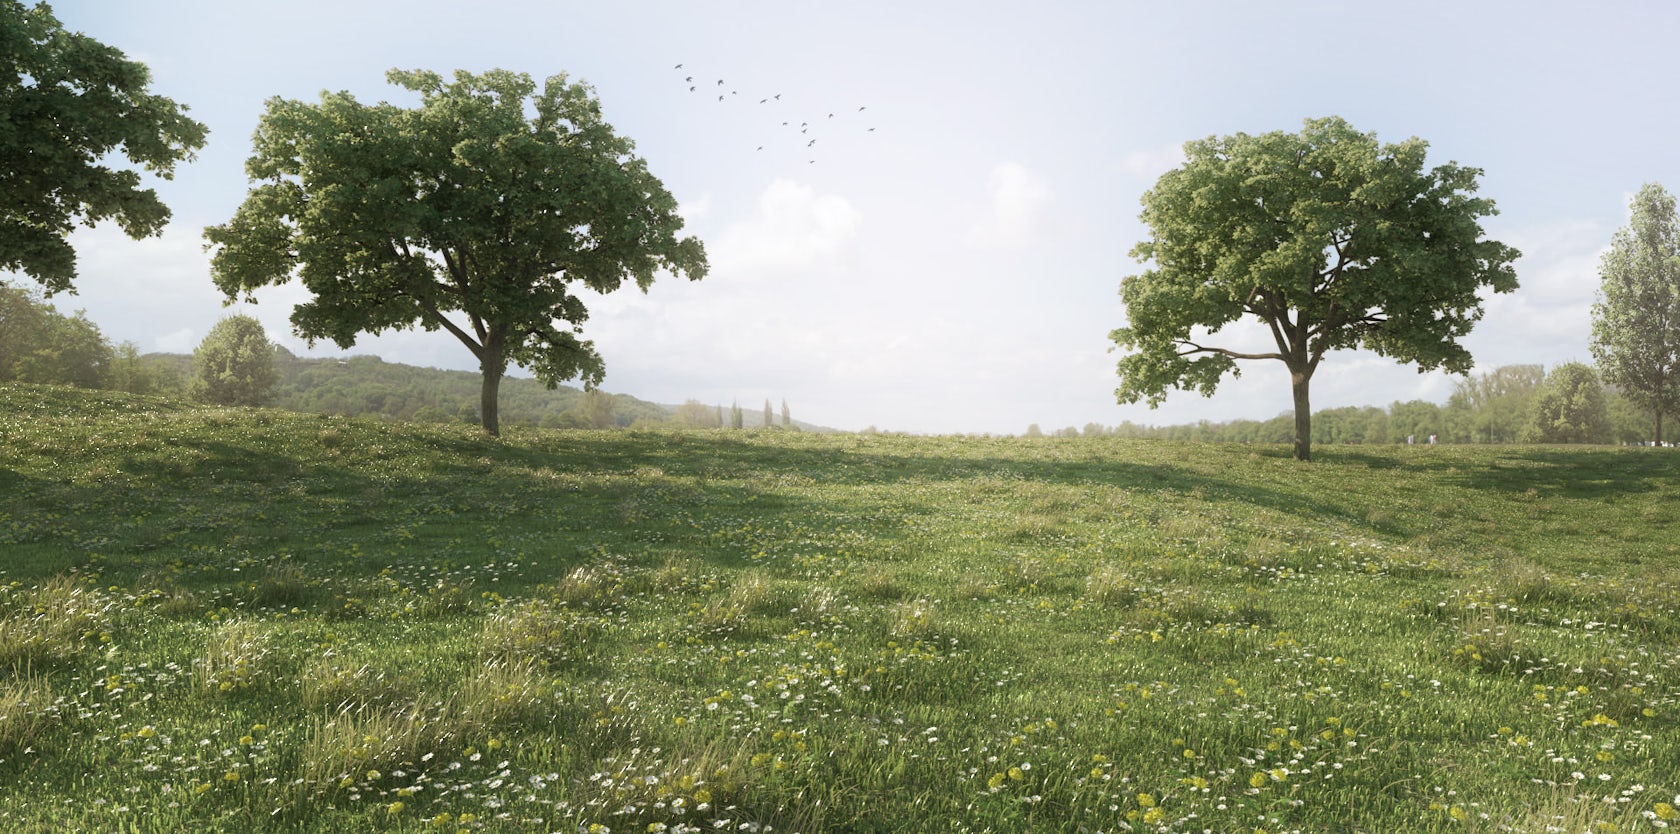 How to Create Photo-Real Greenery in SketchUp - Architizer Journal